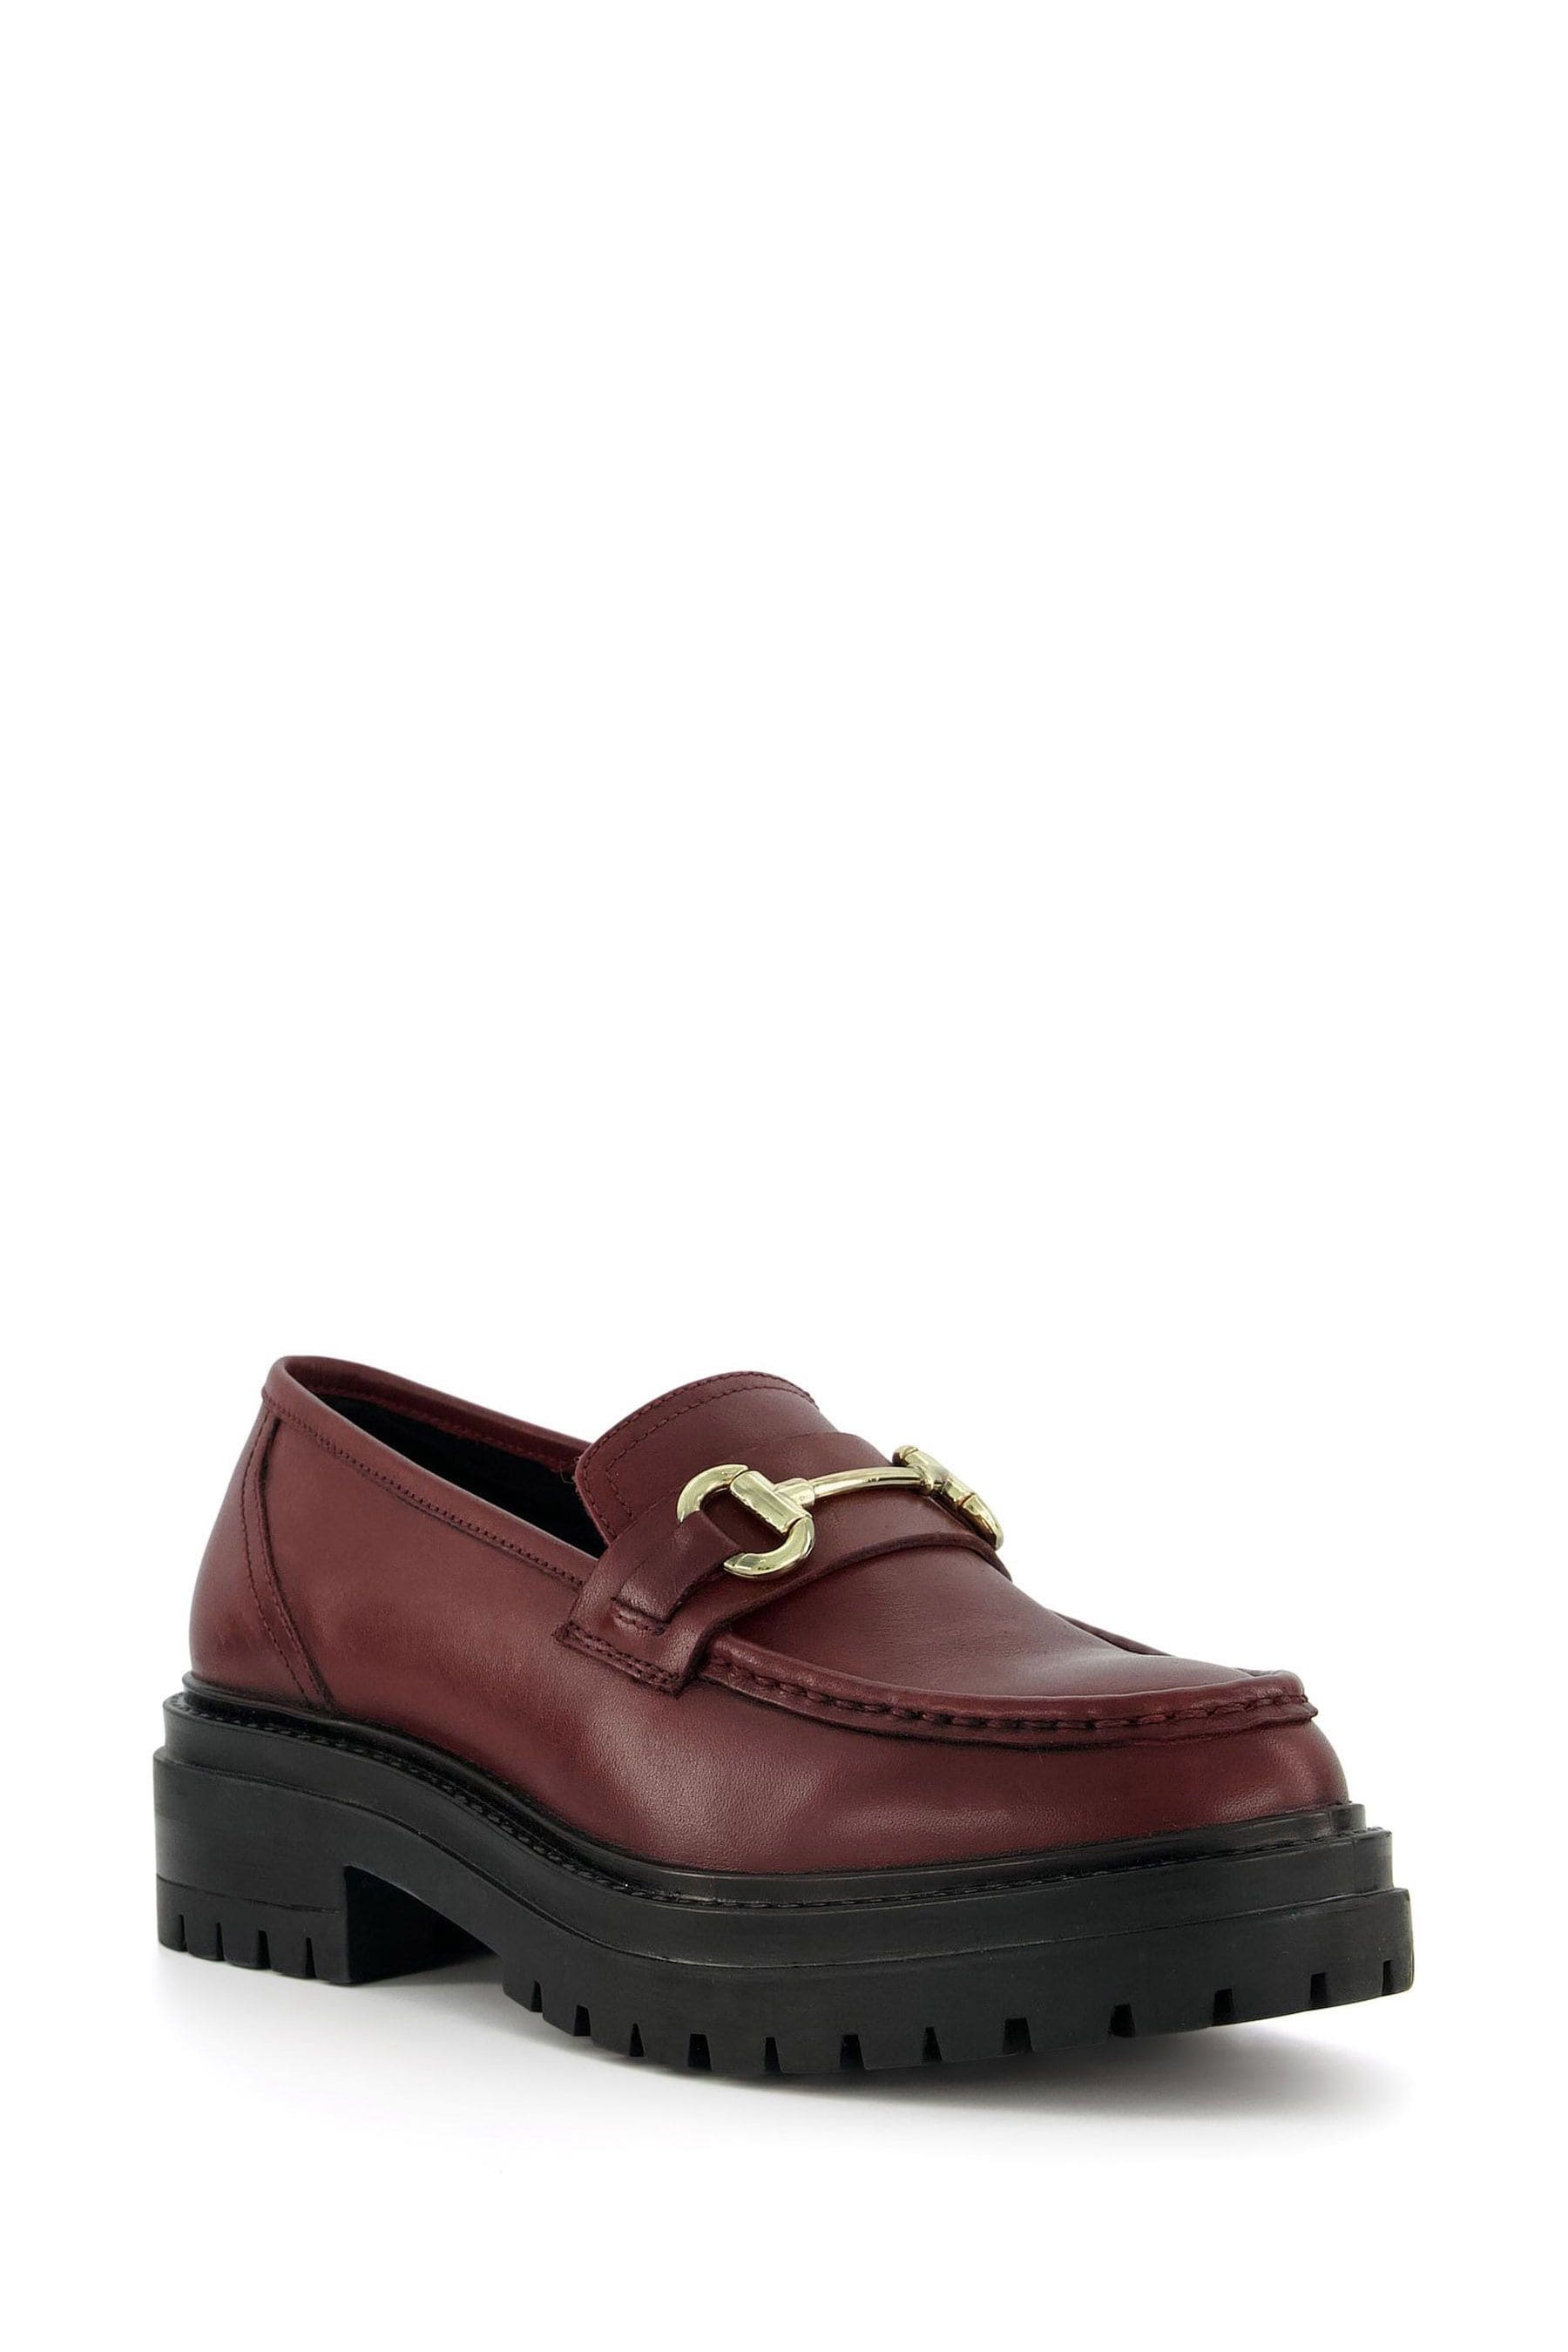 Buy Dune London Red Gallagher Chunky Snaffle Trim Loafers from the Next ...